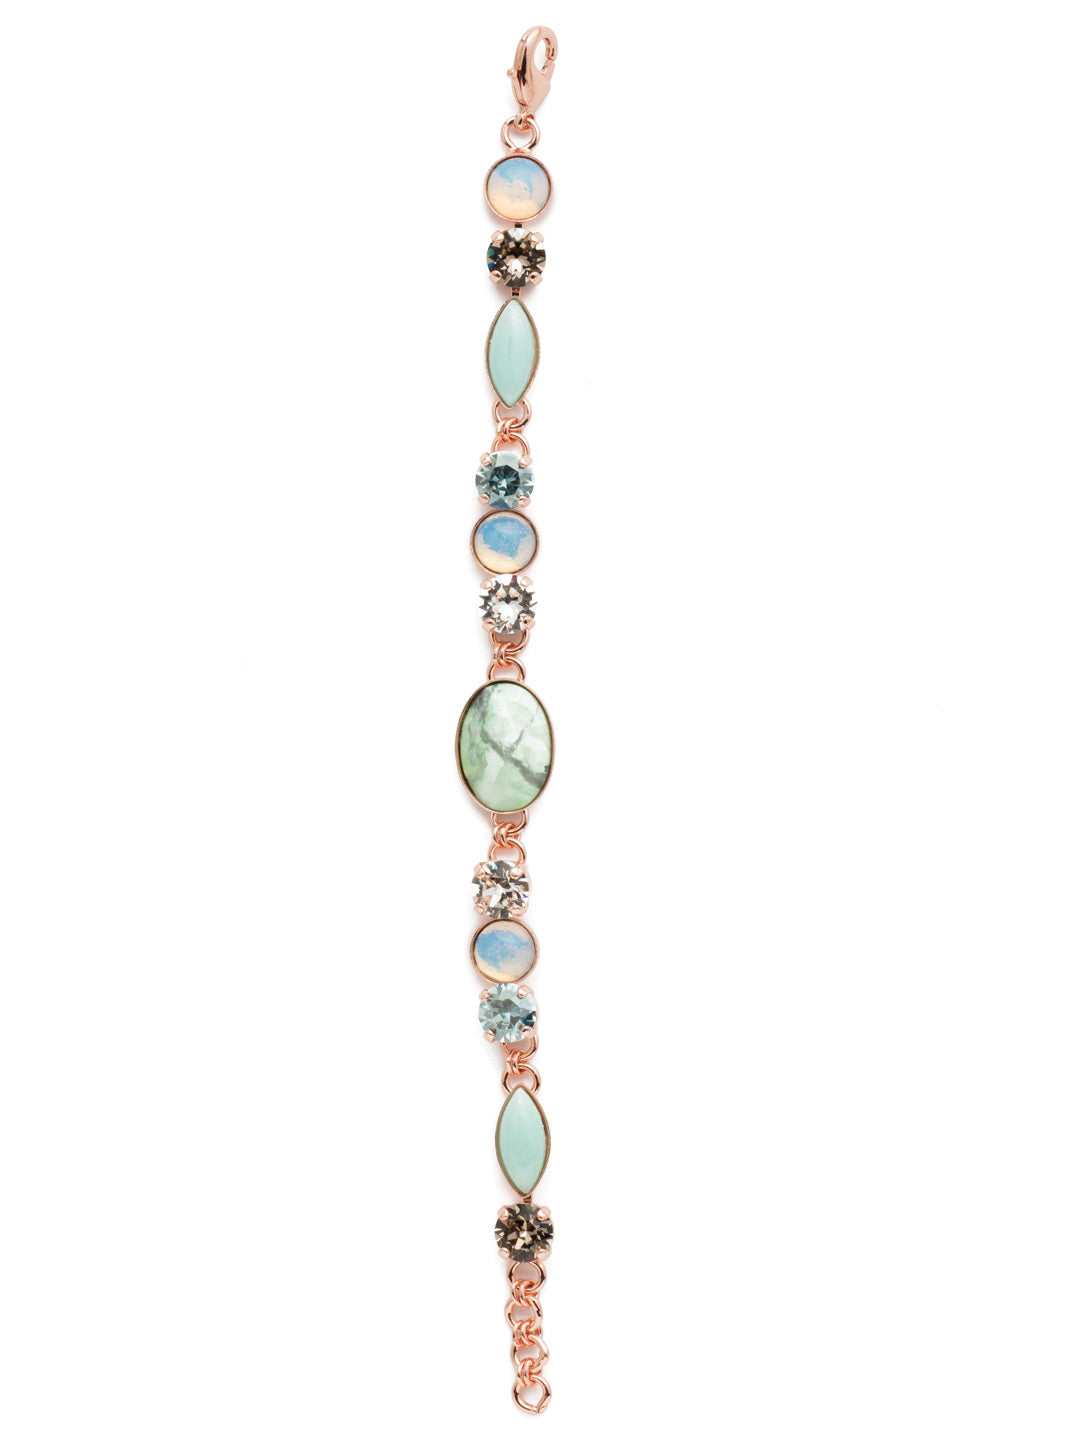 Astro Tennis Bracelet - BET4RGCAZ - Our Astro Tennis Bracelet offers a healthy mix of stylish features with classic Sorrelli crystals in round and navette shapes, set off by a center stone with an earthy feel. From Sorrelli's Crystal Azure collection in our Rose Gold-tone finish.